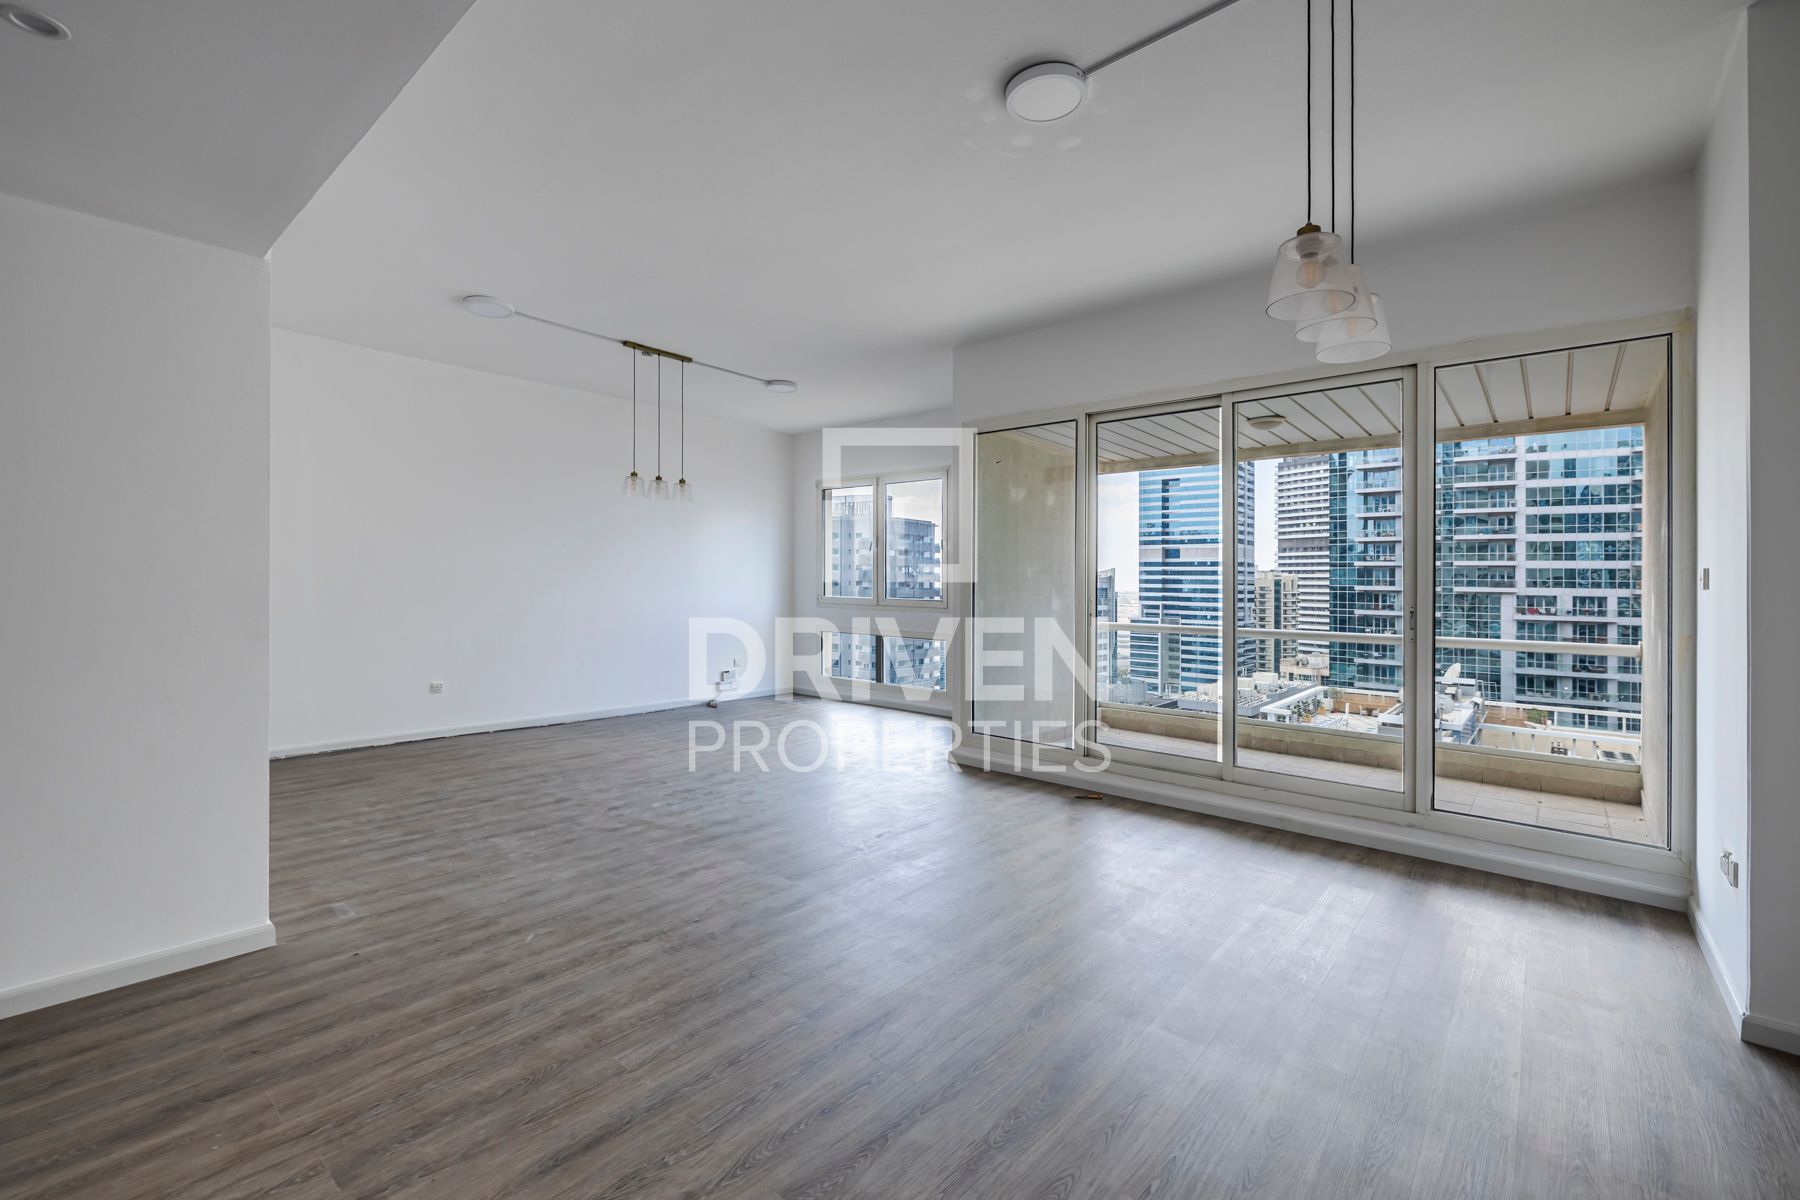 Spacious & Bright Apt | Ready To Move In